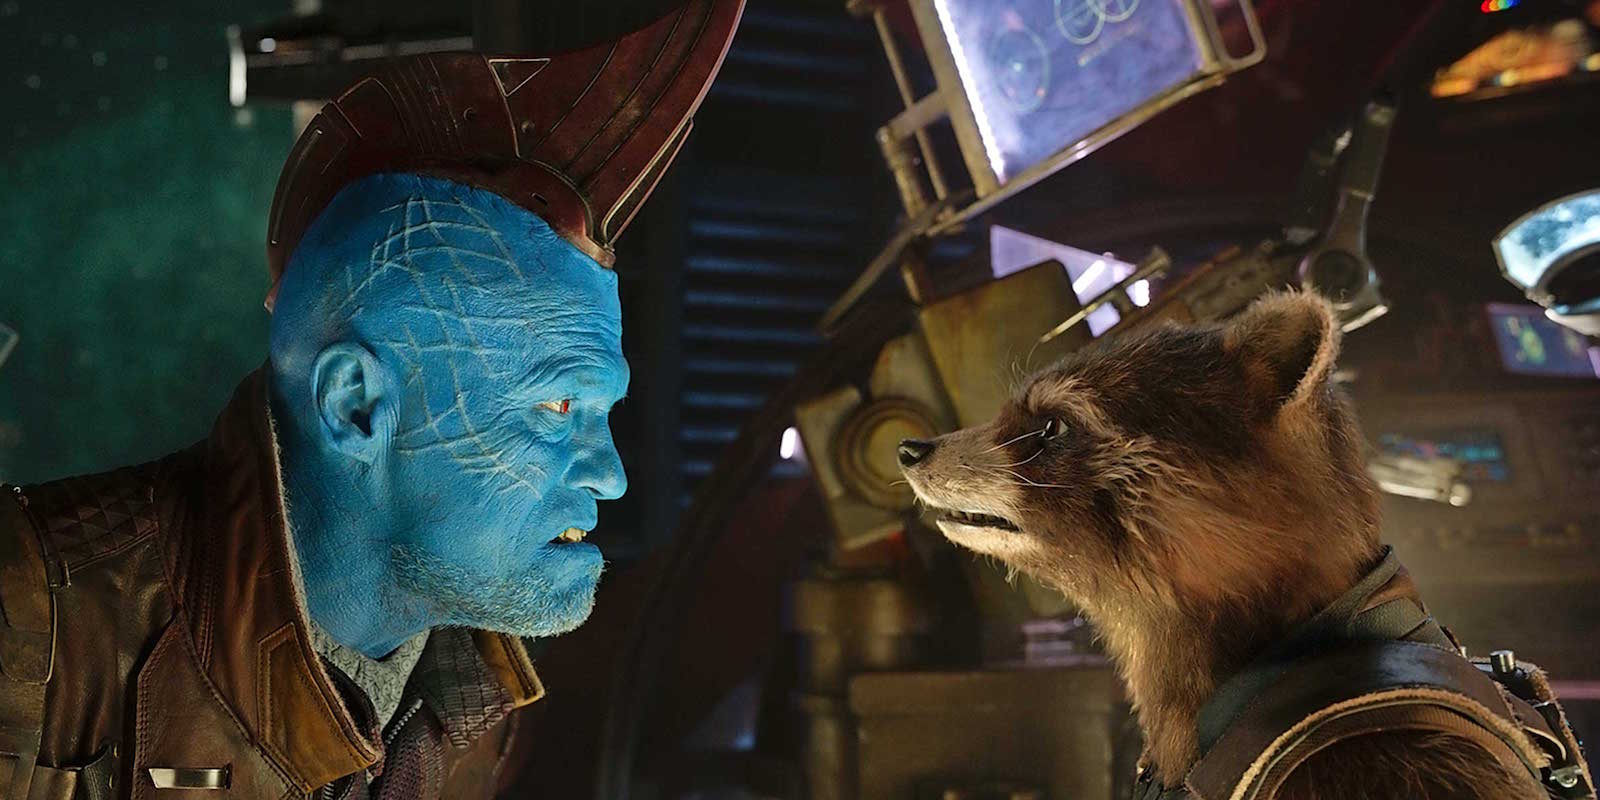 Get The Yondu Look Tribute Event Celebrating Guardians of the Galaxy Vol. 2 on Blu-Ray and MEET Michael Rooker!